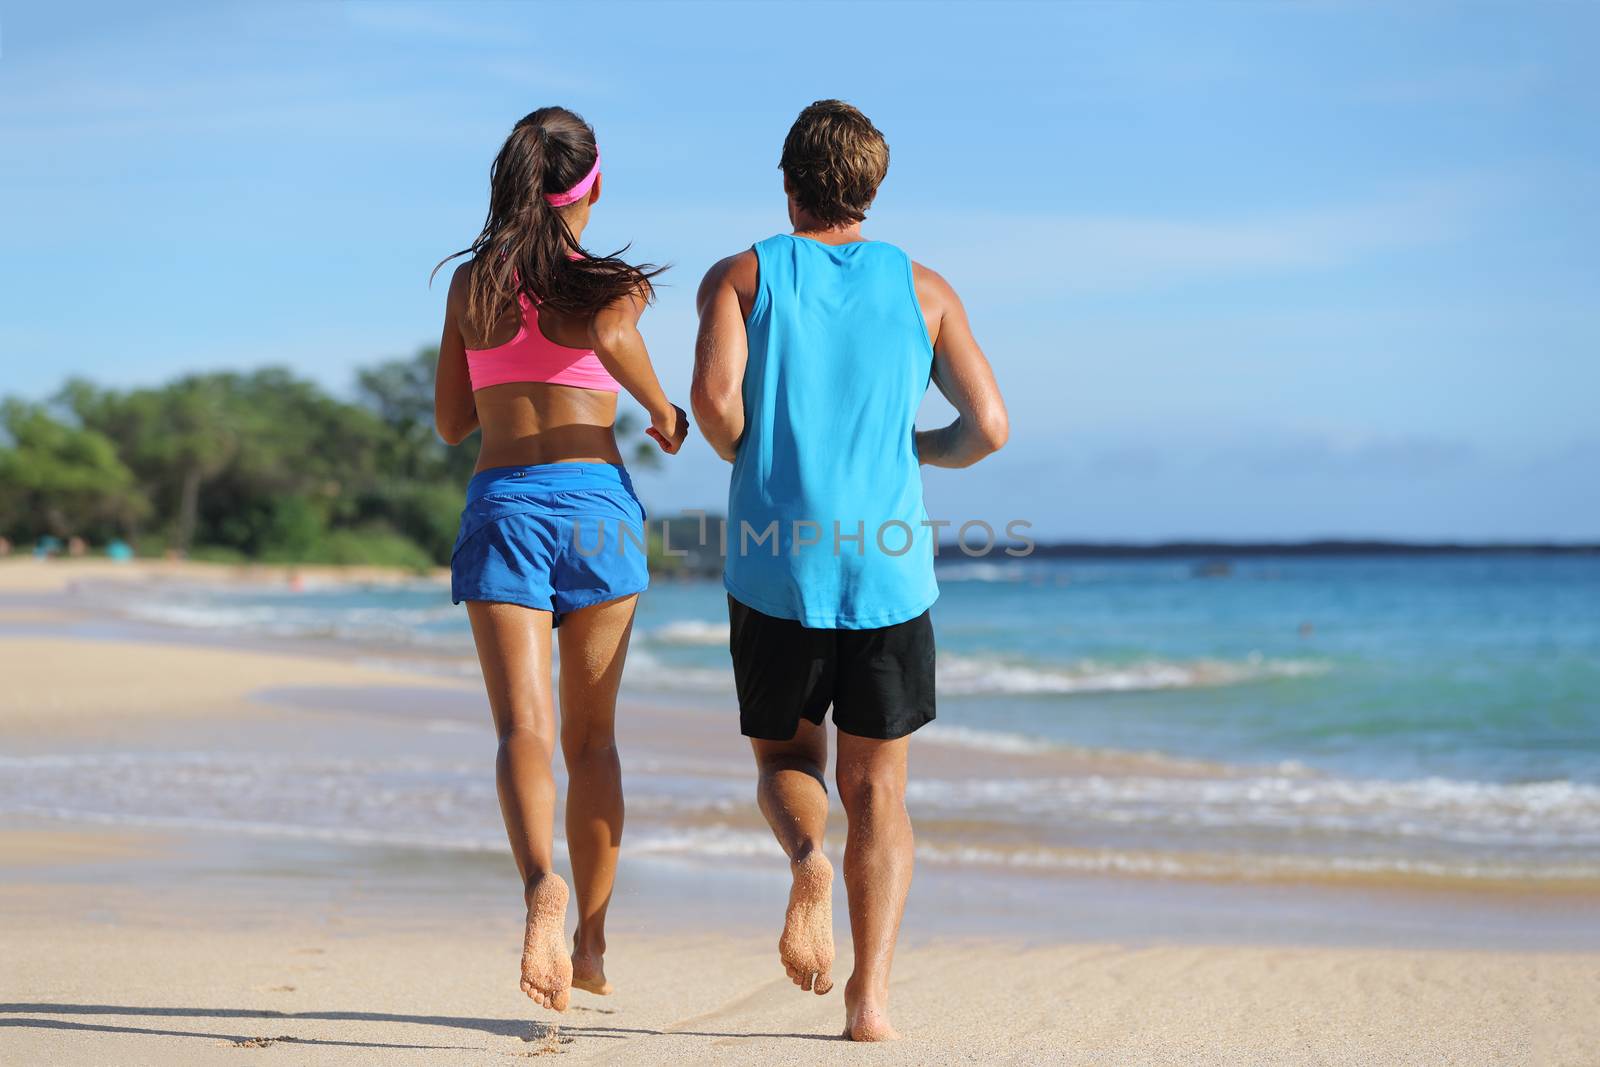 Two fitness athletes running together on beach. People from behind jogging away barefoot on sand on tropical travel destination. Healthy fit young adults with muscular slim legs training cardio by Maridav